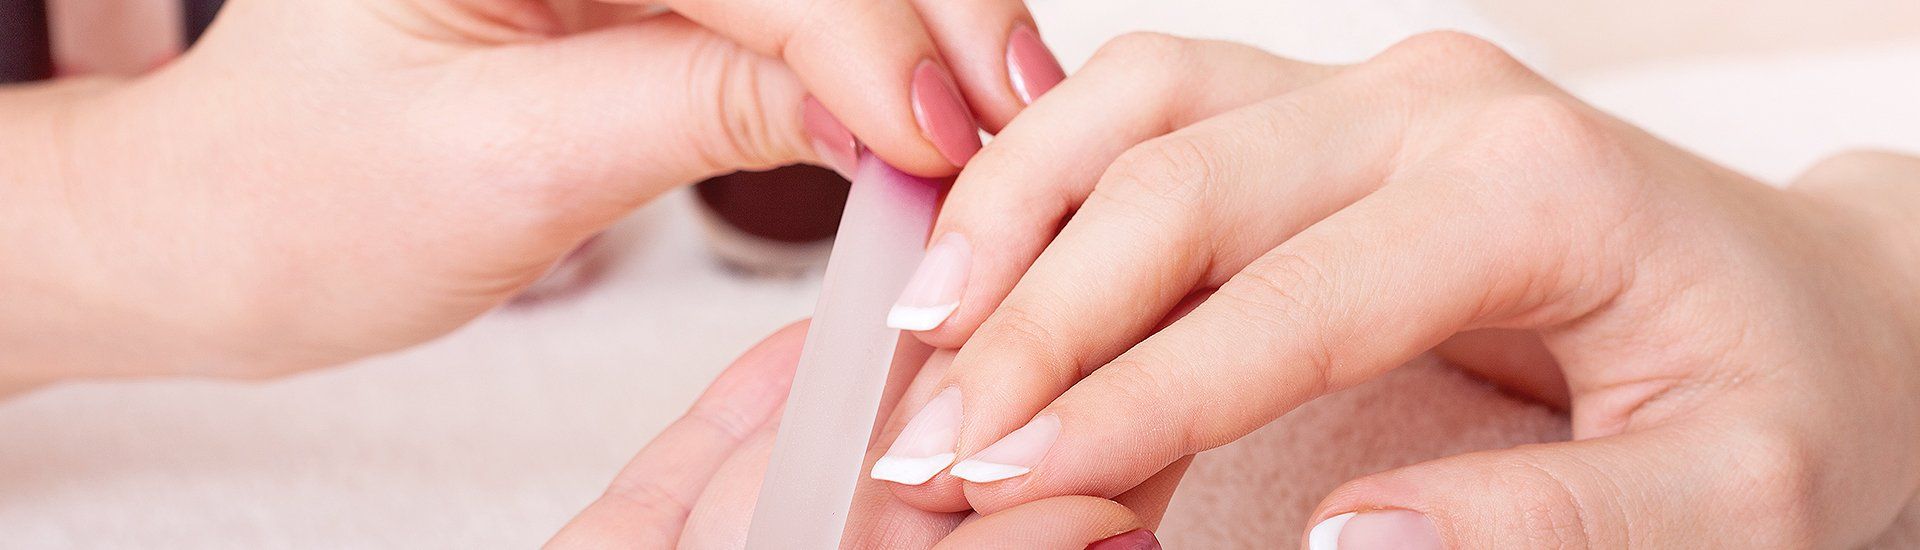 nails being filed prior to manicure session